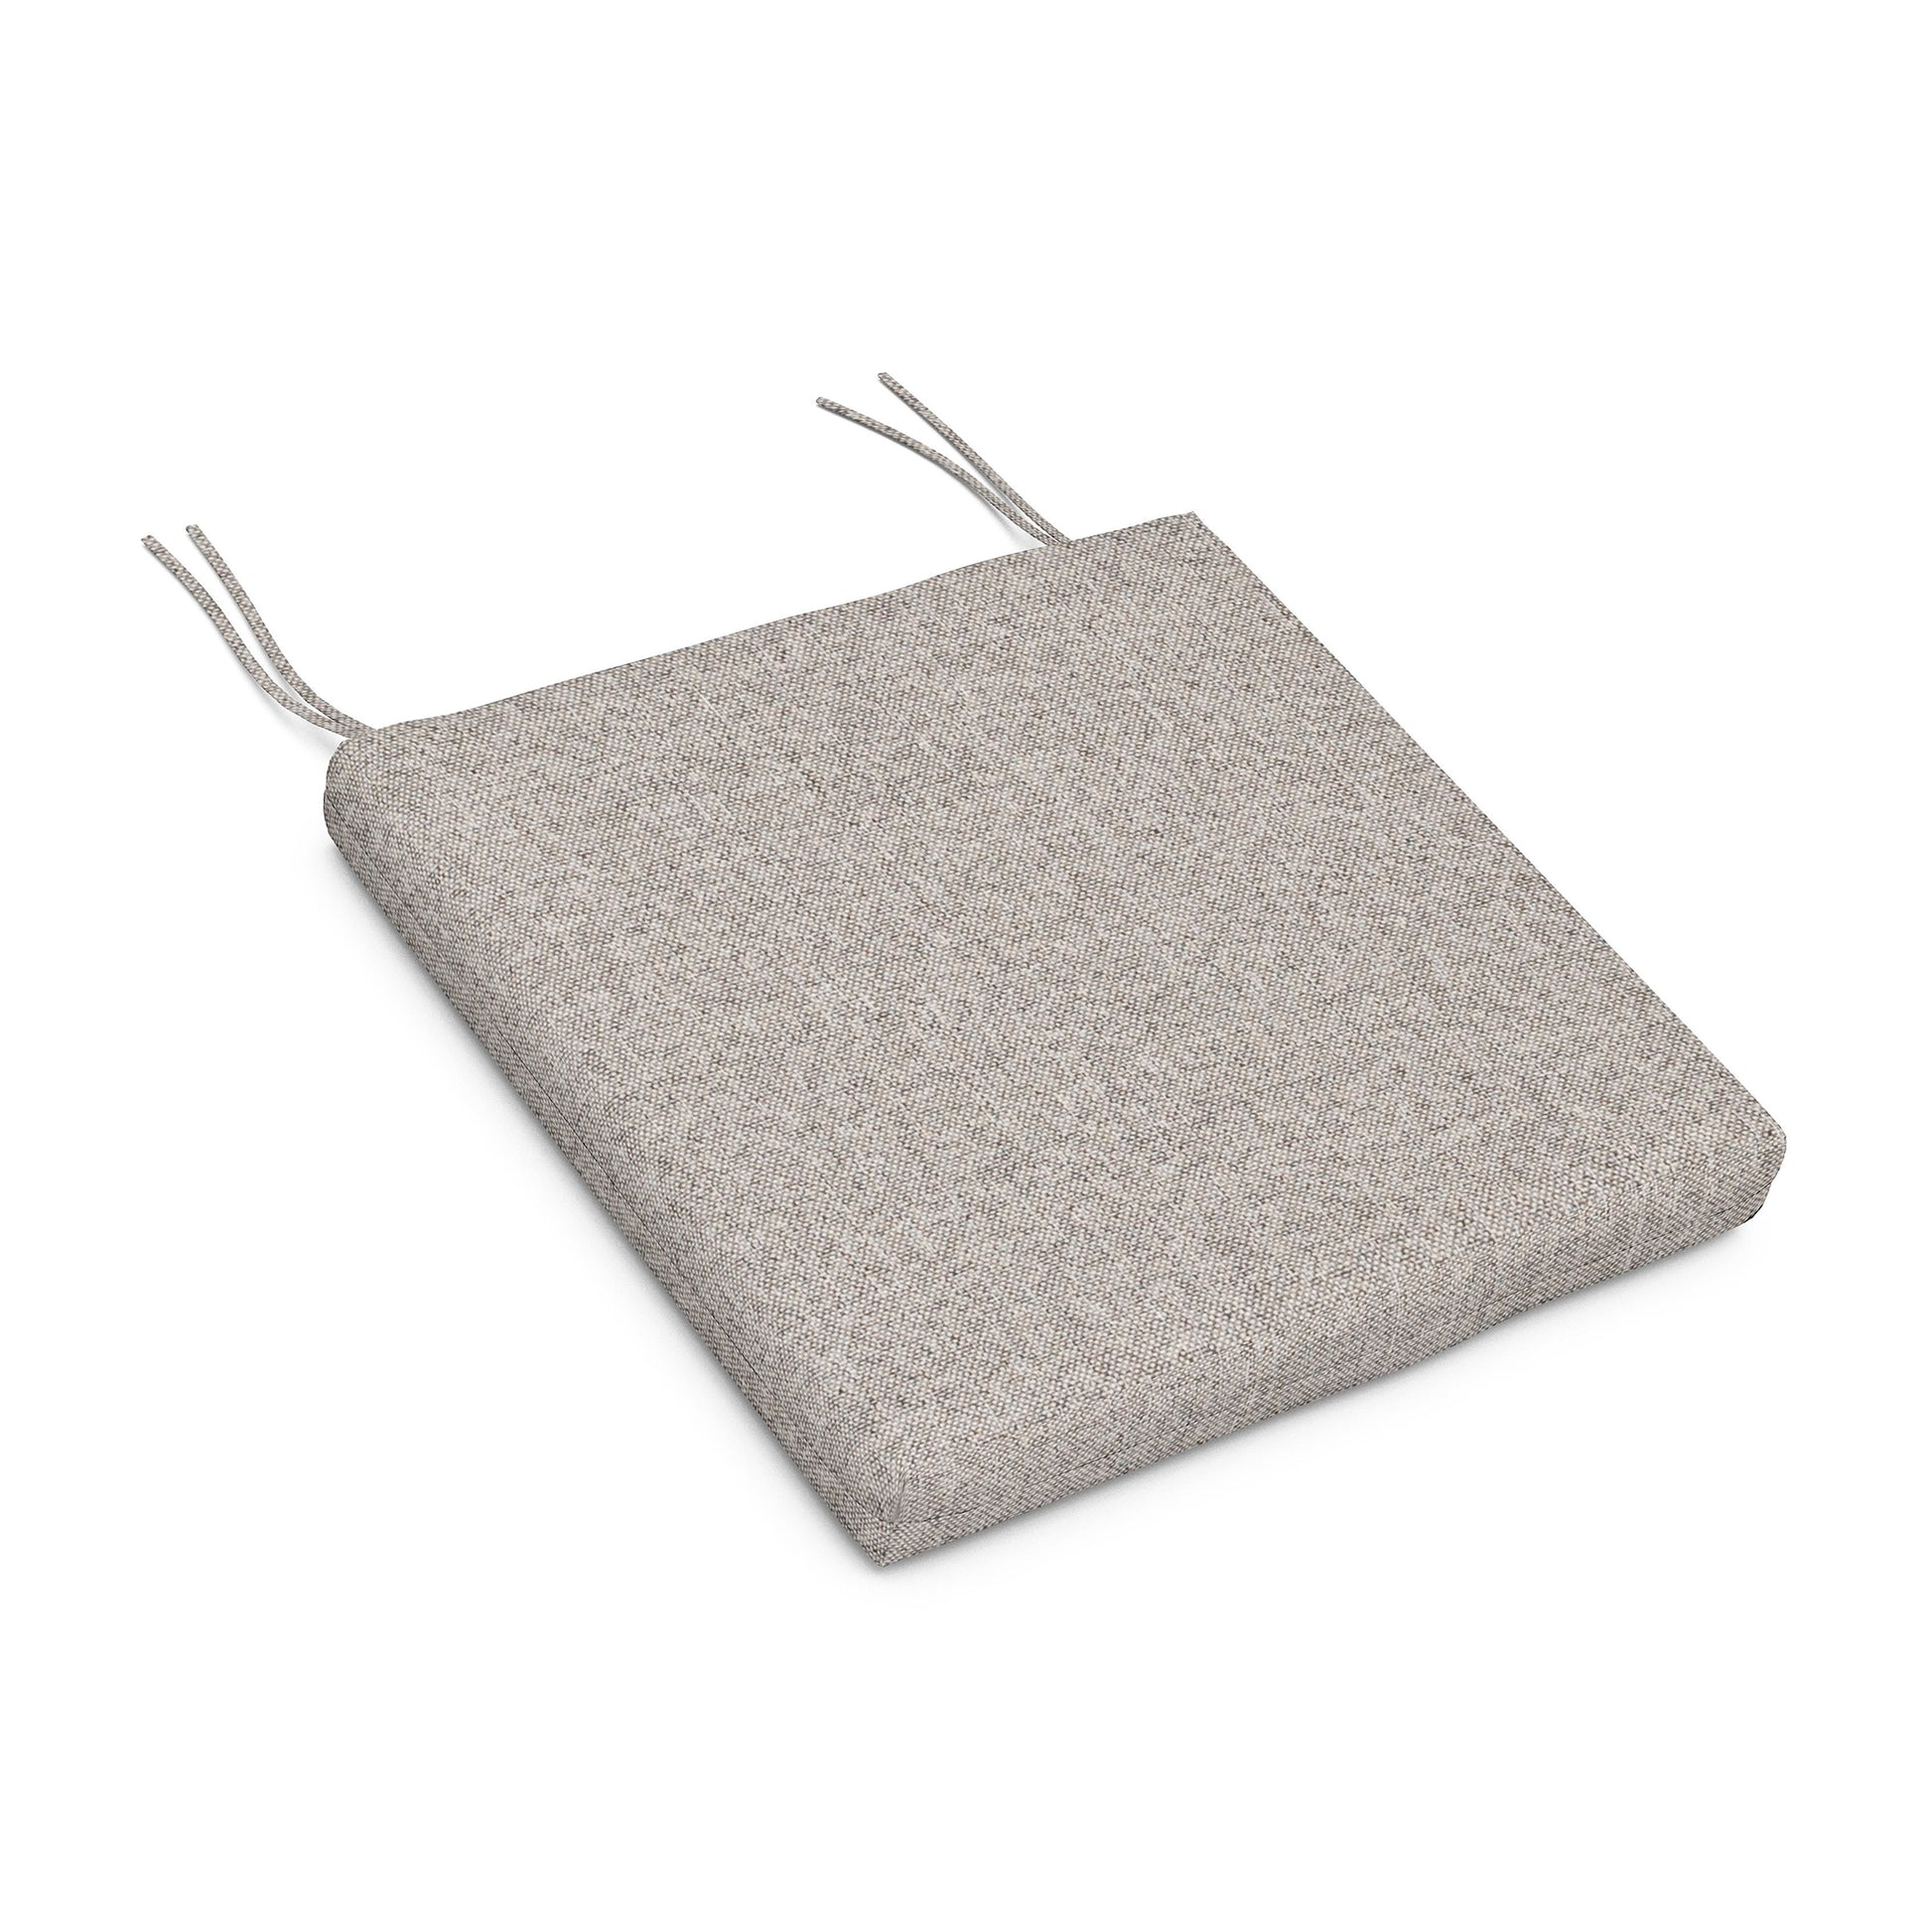 A light gray POLYWOOD® XPWS0008 - Seat Cushion with two ties on each side, displayed on a plain white background.